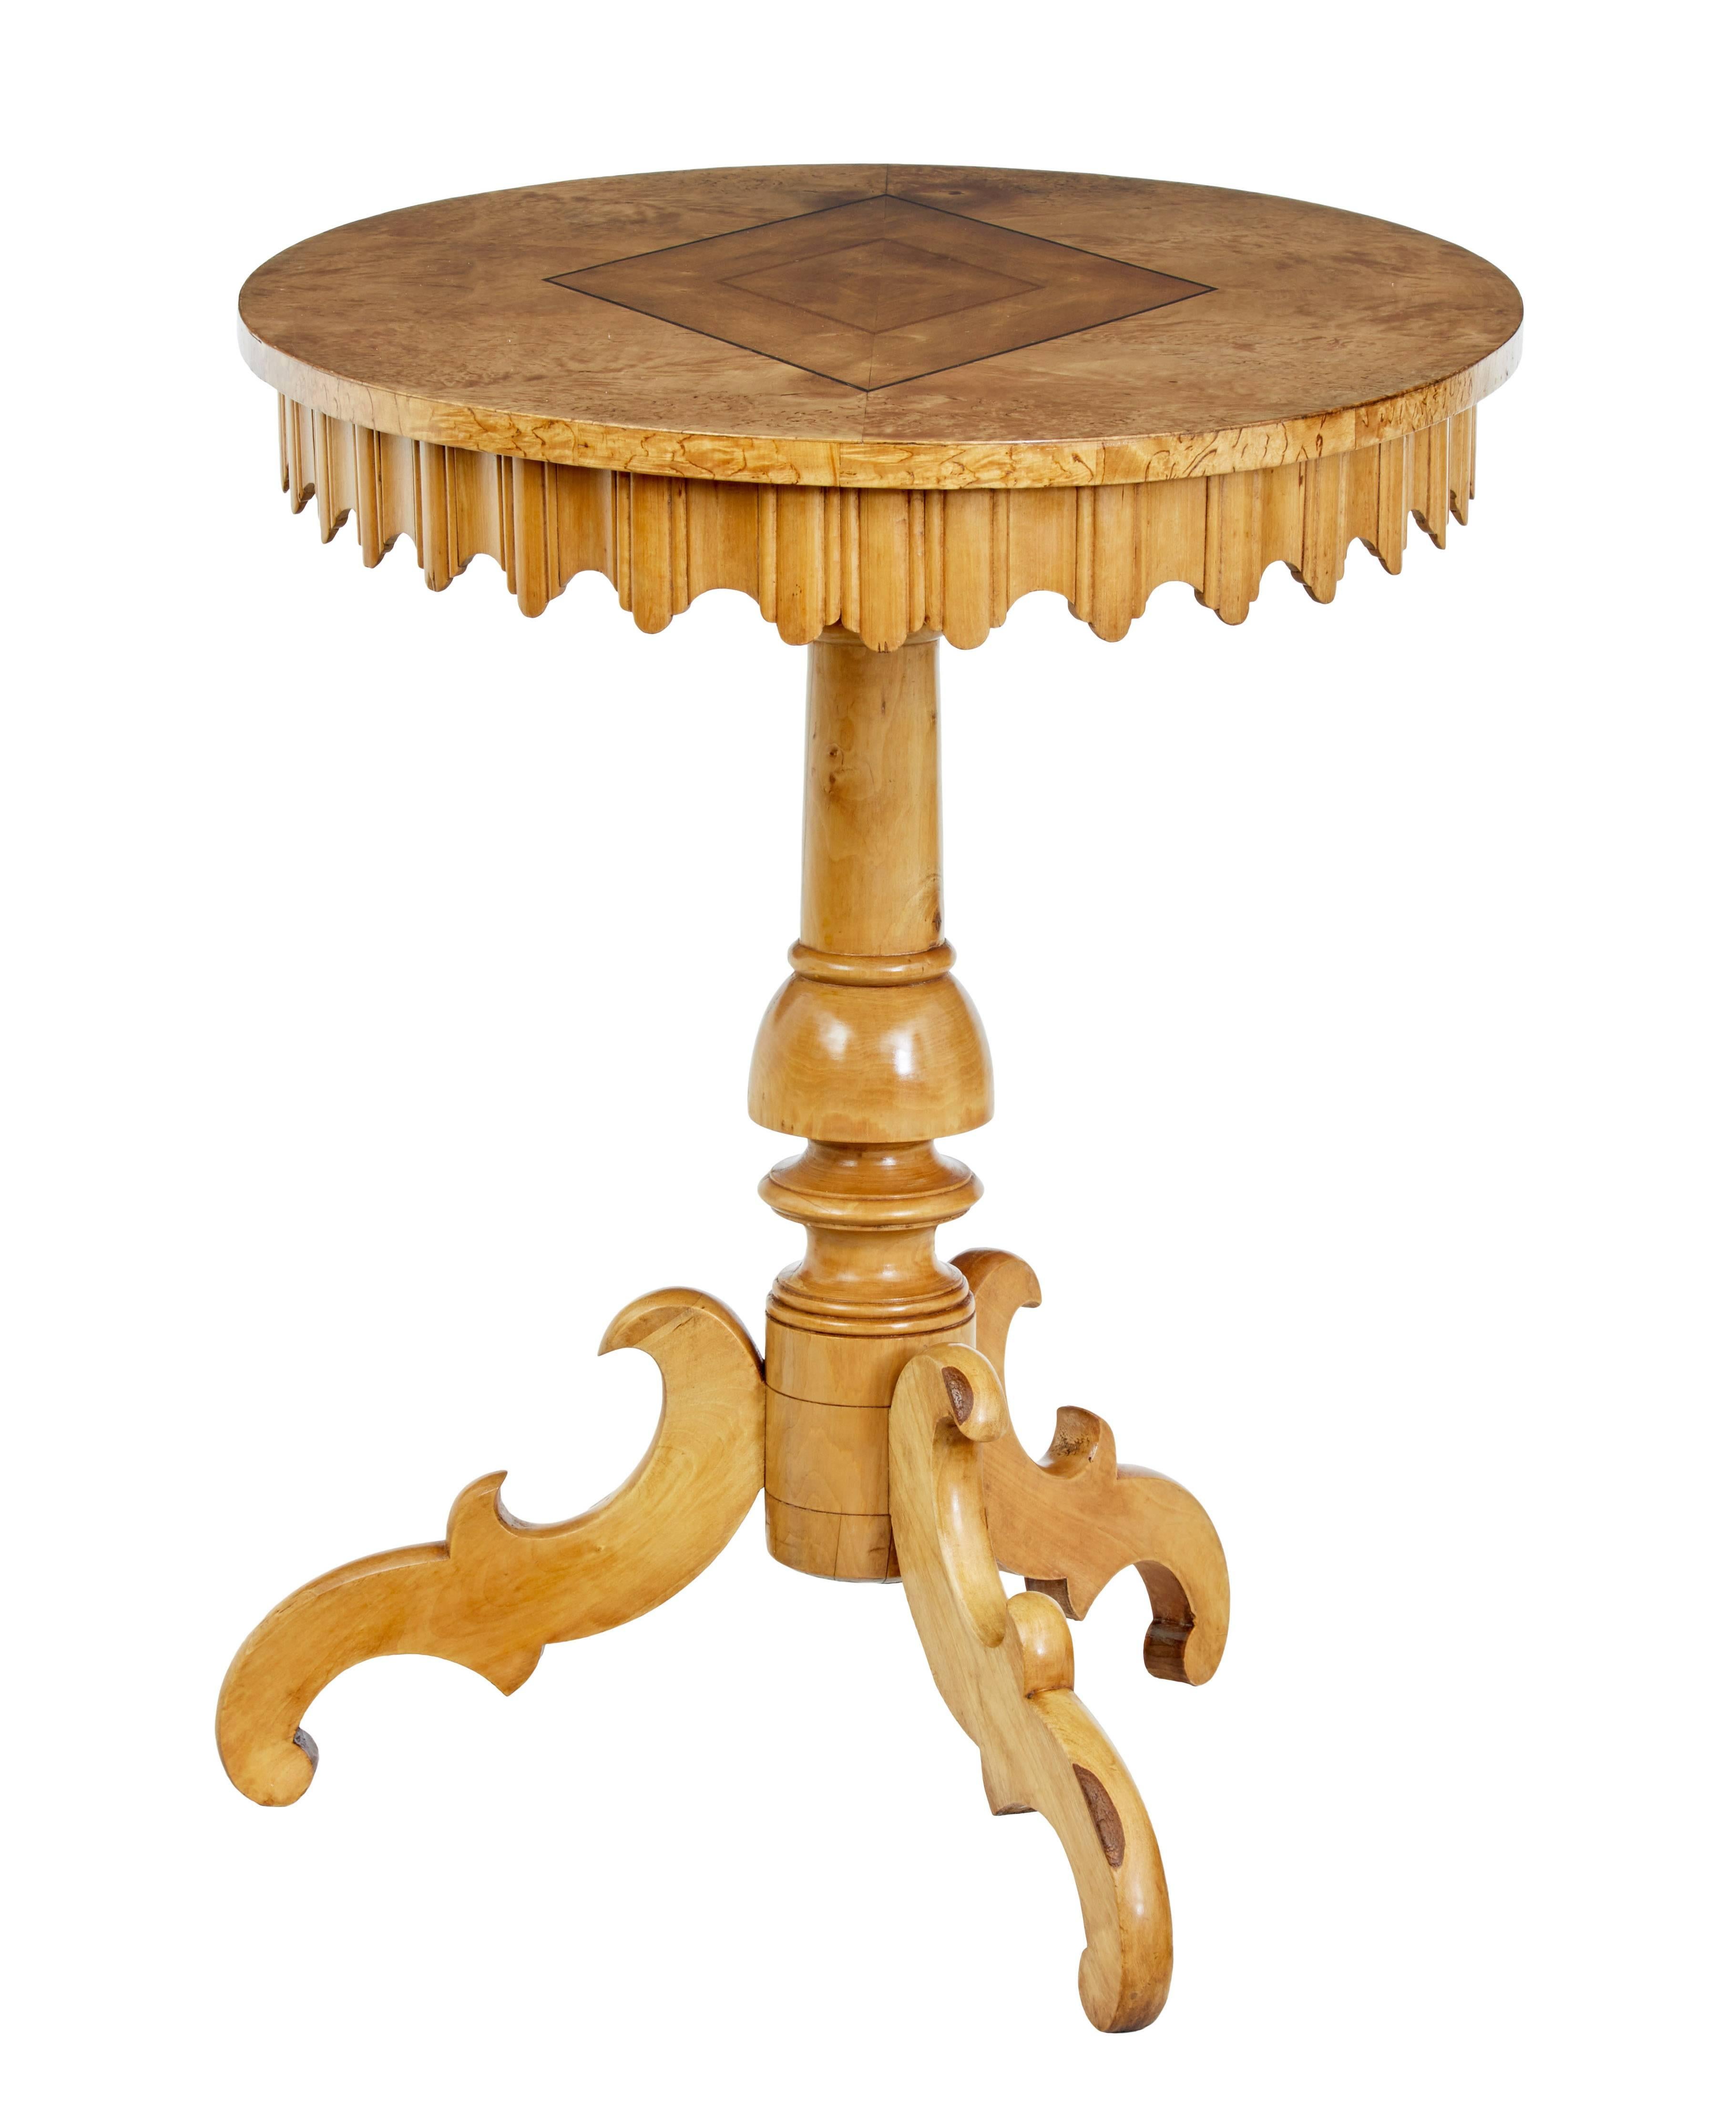 Charming 19th century oval table, circa 1850.

Burr birch top with walnut inlaid diamond shape strung with ebony.

Carved Gothic shaped frieze, standing on turned stem tripod base.

Minor mark to top, restored age split to stem base.